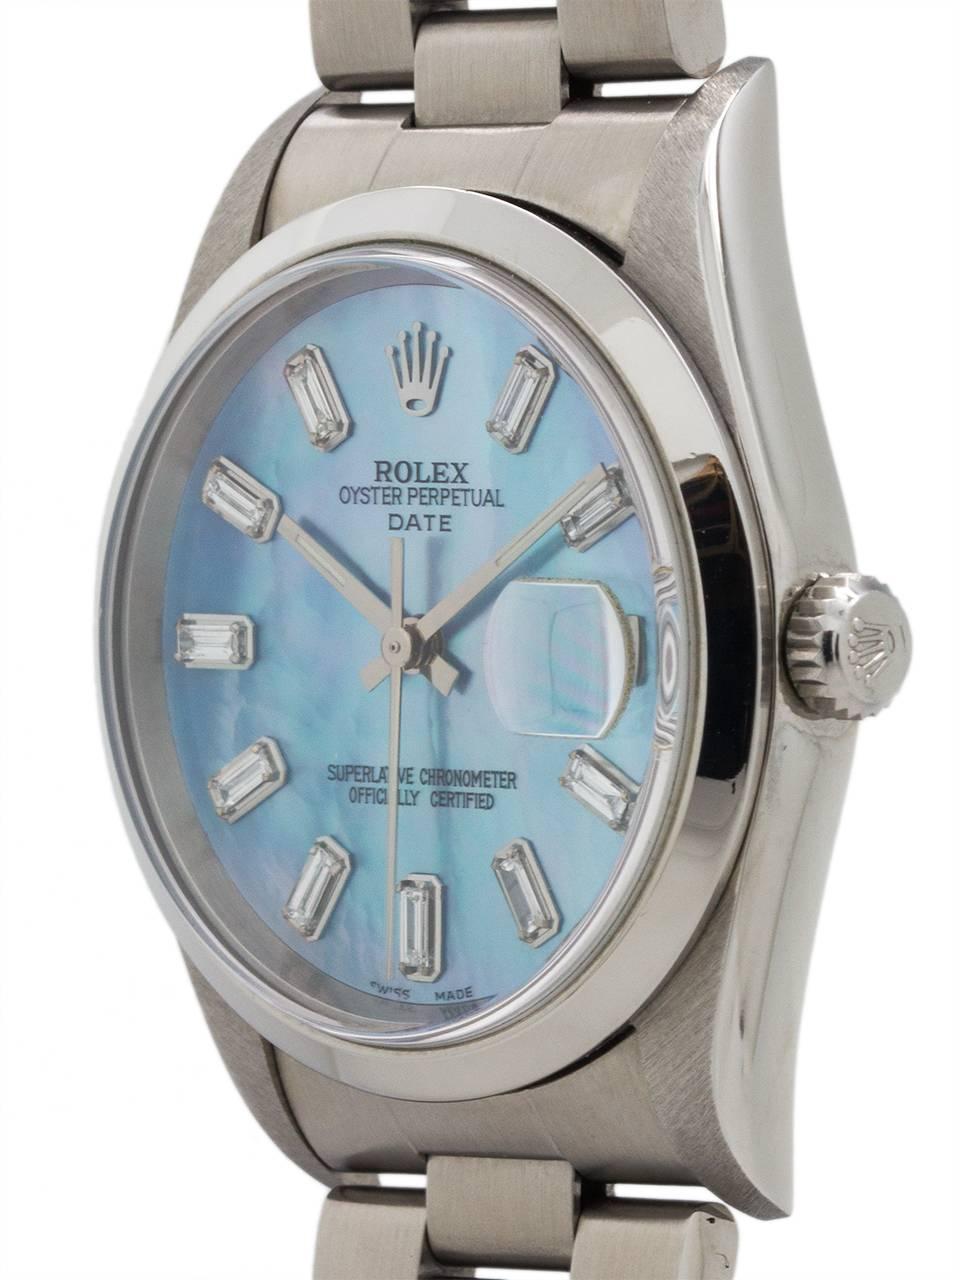 Rolex Oyster Perpetual Date ref 15200 serial# T4 circa 1996 with beautiful customized blue mother of pearl dial with all baguette diamond indexes. Featuring a 34mm diameter case with smooth bezel, sapphire crystal, and impressive looking all